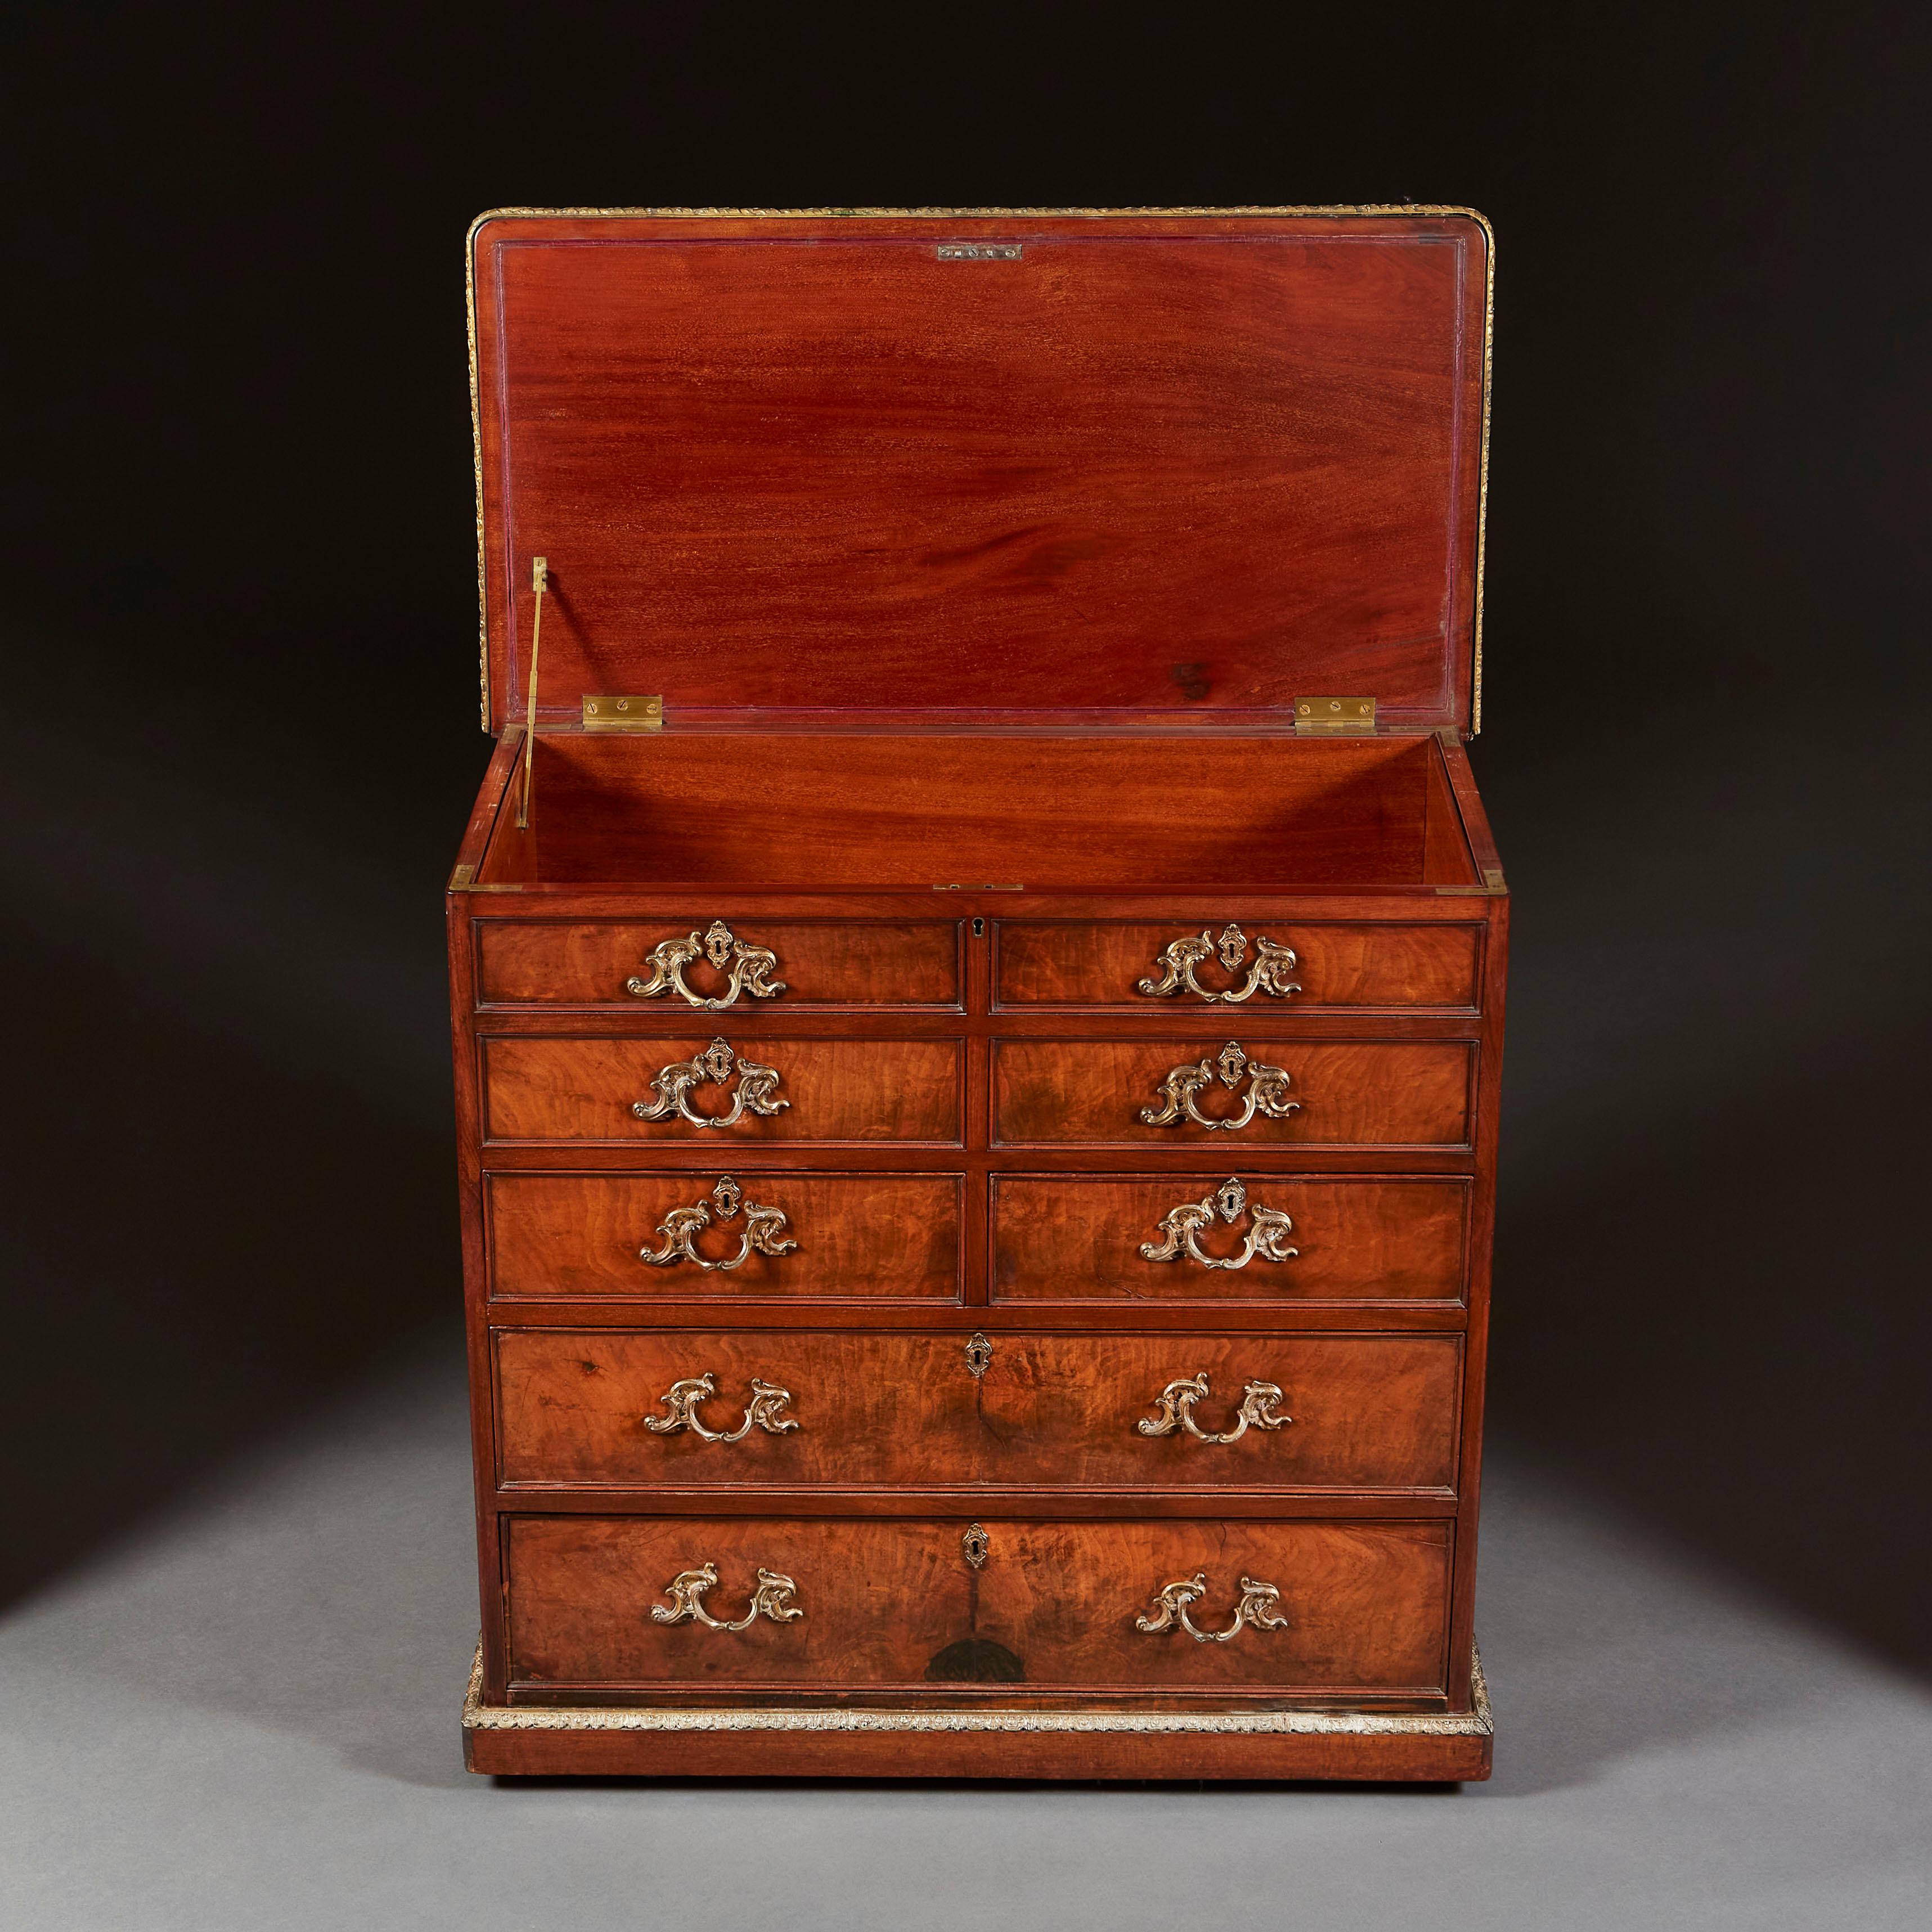 A very fine early nineteenth century mahogany chest of drawers, the top four drawers dummy with open lid, with three drawers below, the handles with fine Rococo brasswork, lined throughout with mahogany, all supported on a plinth base.